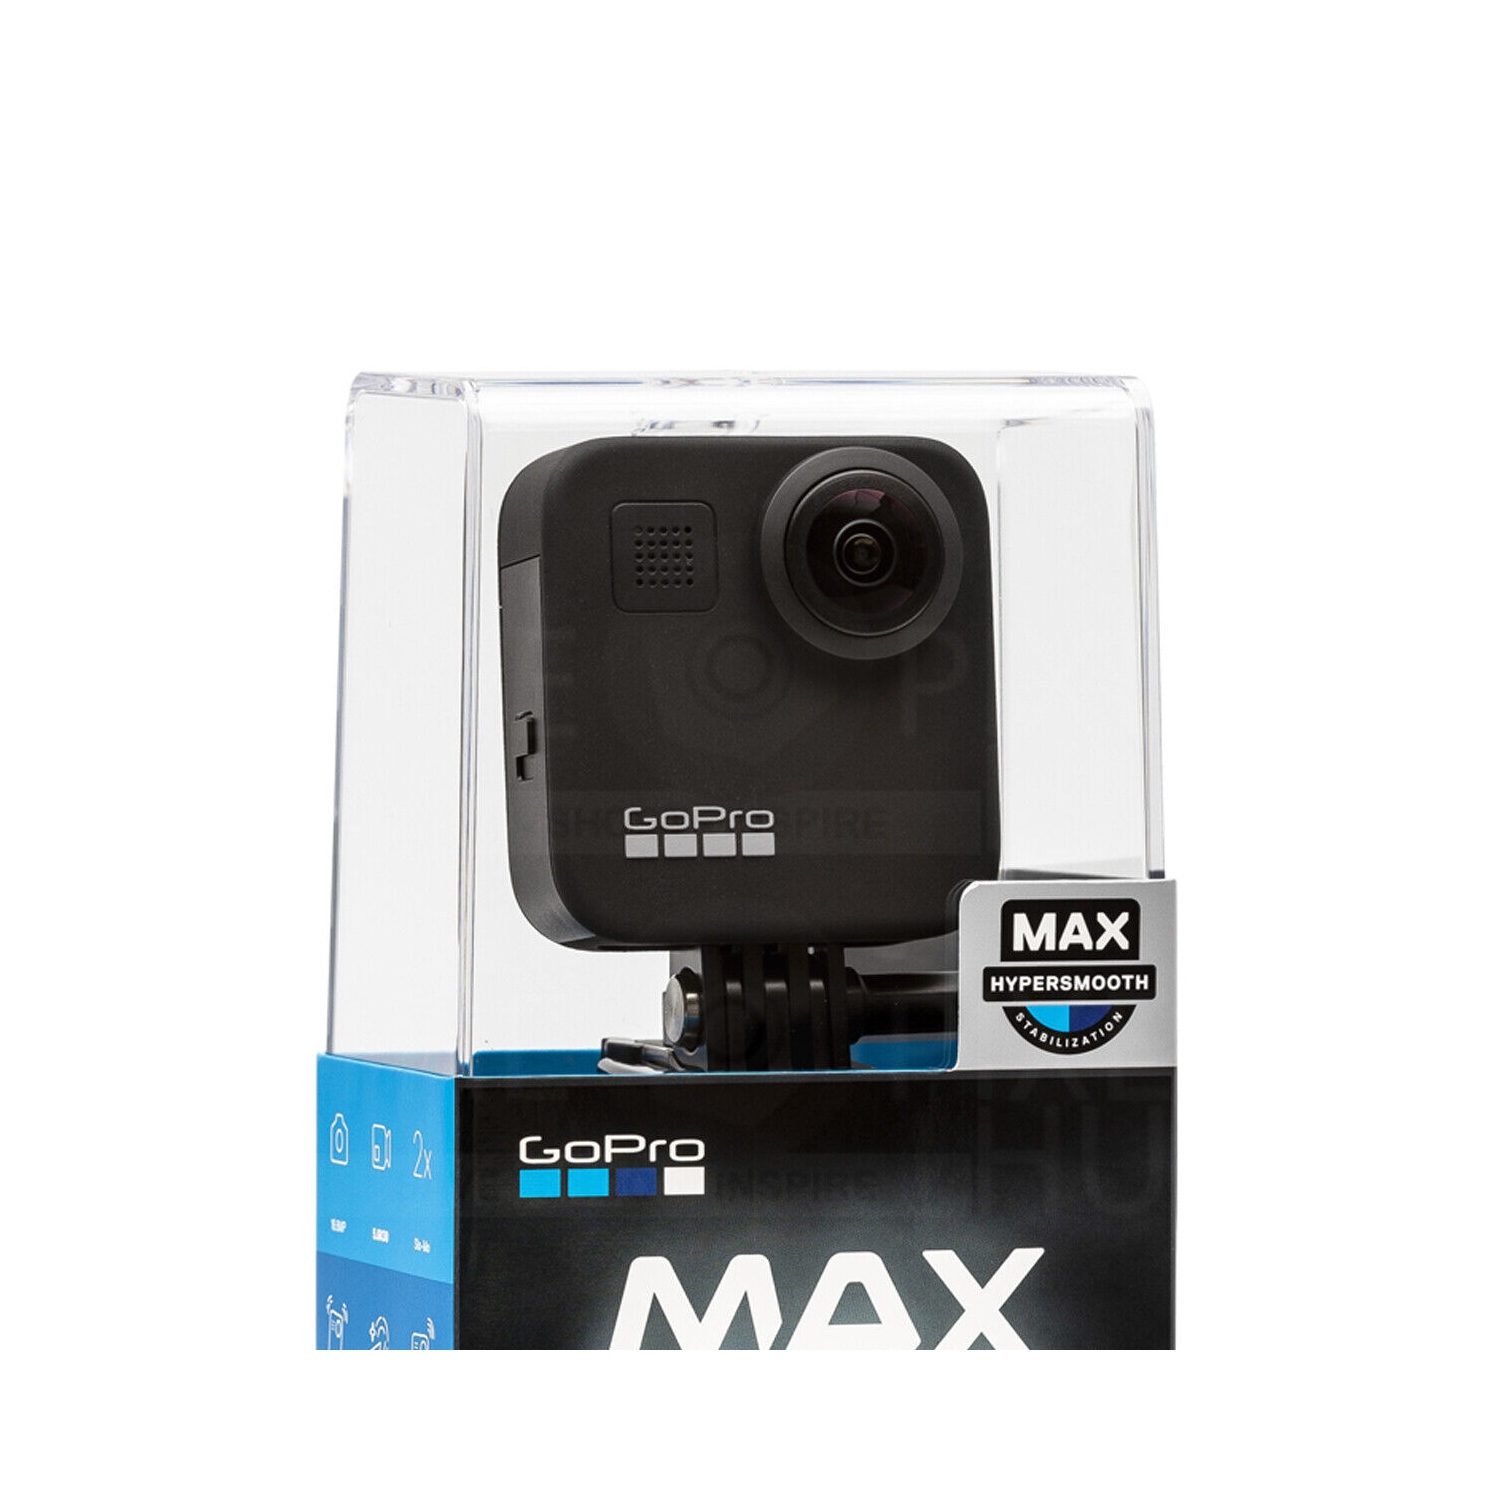 GoPro MAX 360 Waterproof Action Camera + 32GB + Chest and Head